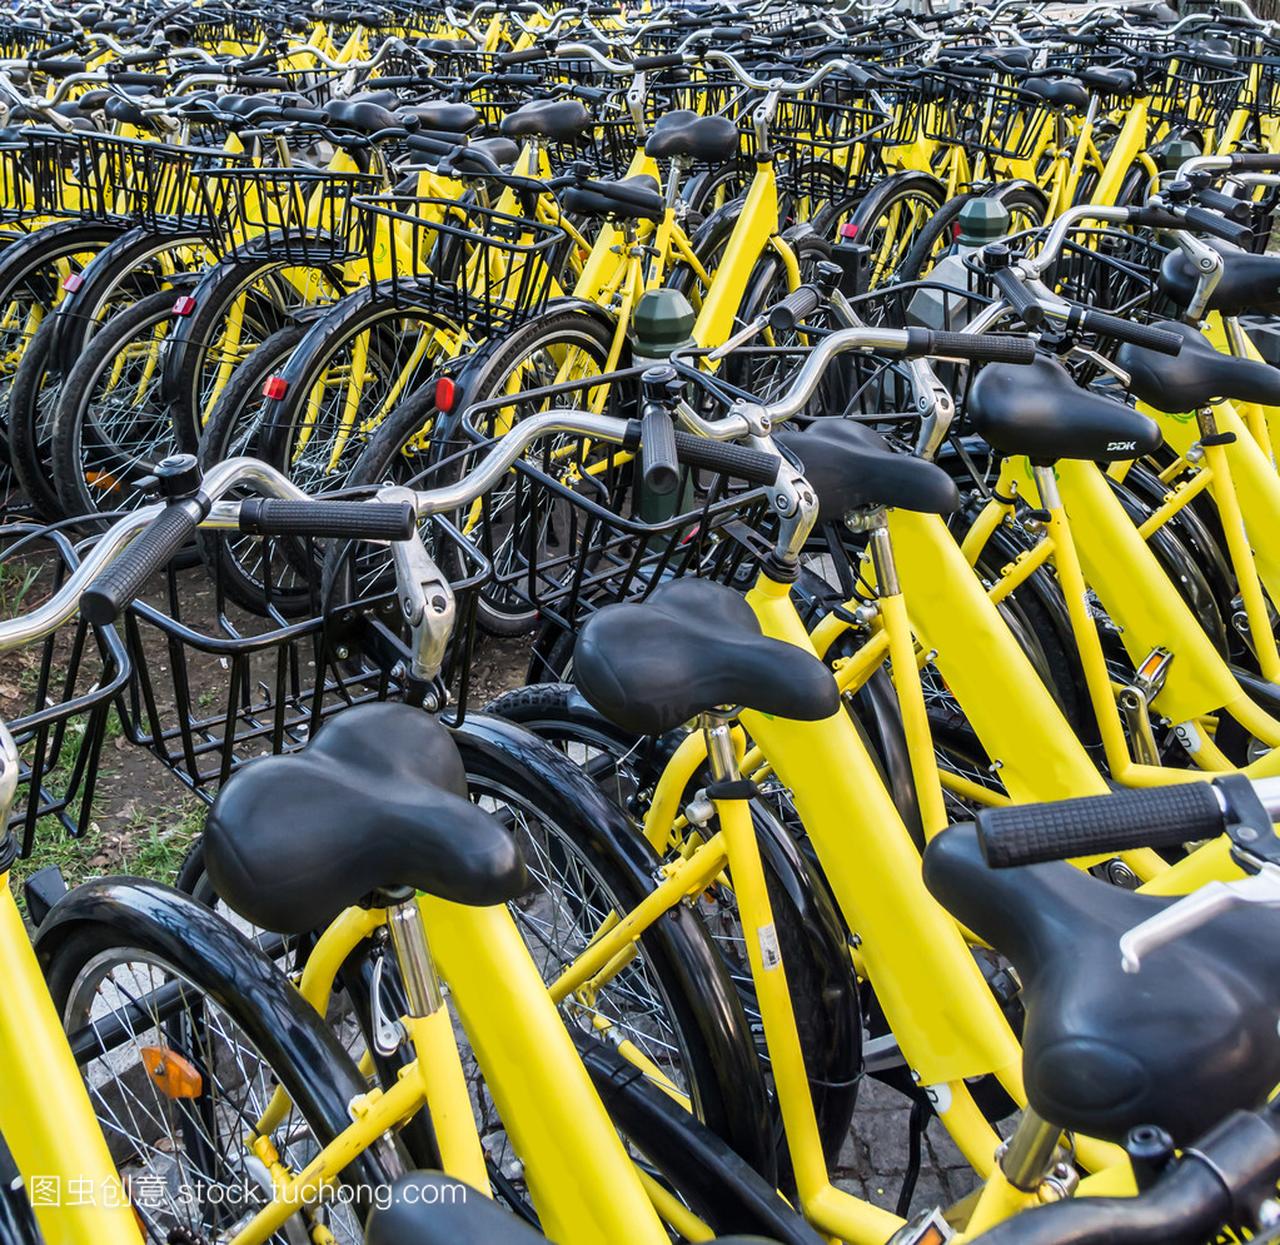 Plenty of yellow bikes parked near a bicycle 